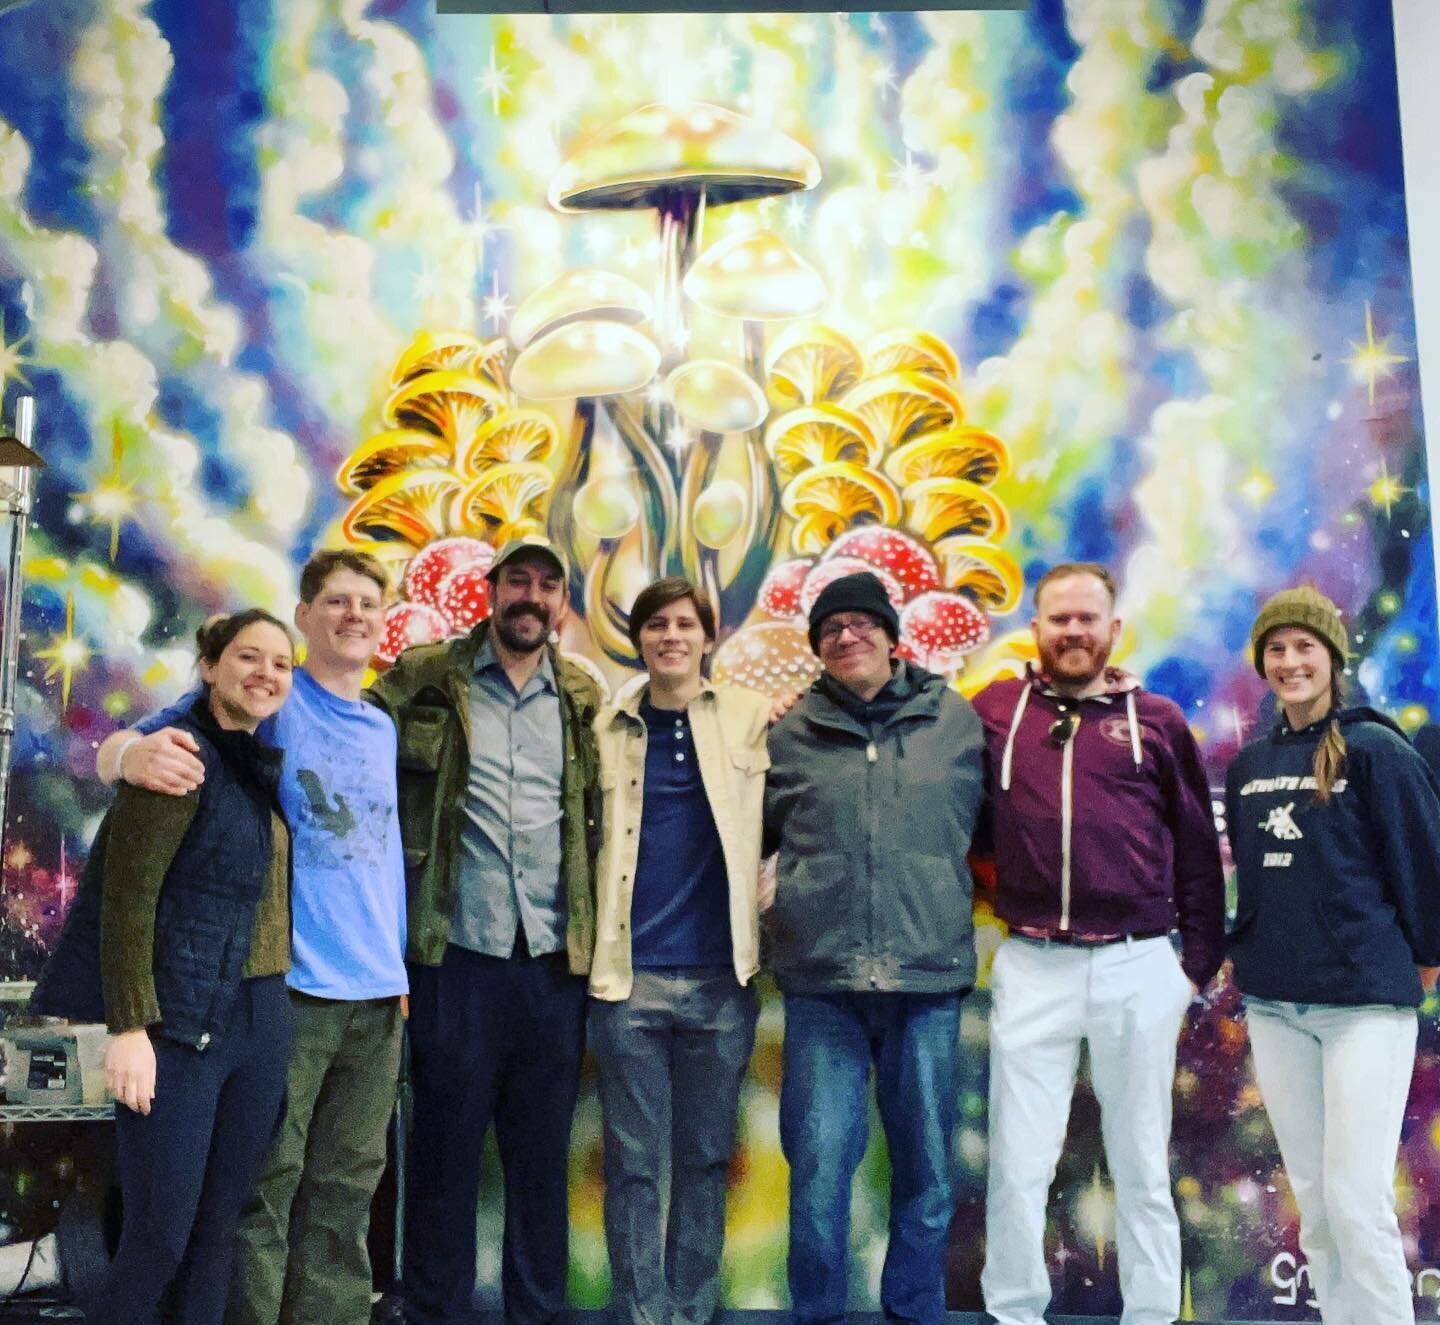 We got to have some of the @madtreealcove kitchen team out to the farm yesterday! Honestly nothing is more exciting than seeing folks we work with get excited about what we do and want to support it through their passions as well. 

Thank you to @zac